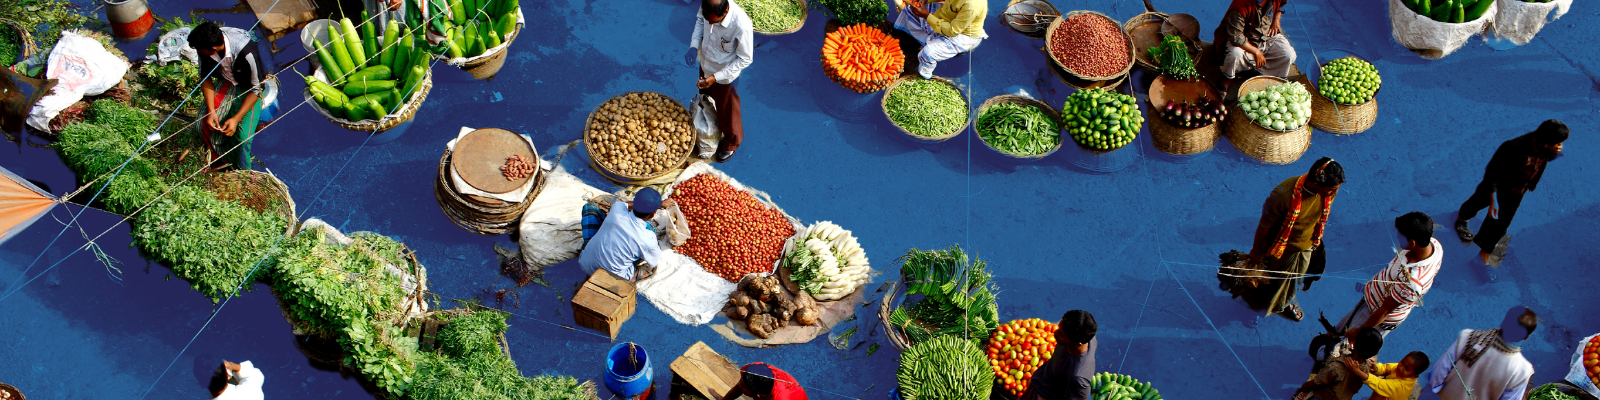 Blog – Insights from TAFSSA’s Agrifood Systems Assessment in Bangladesh